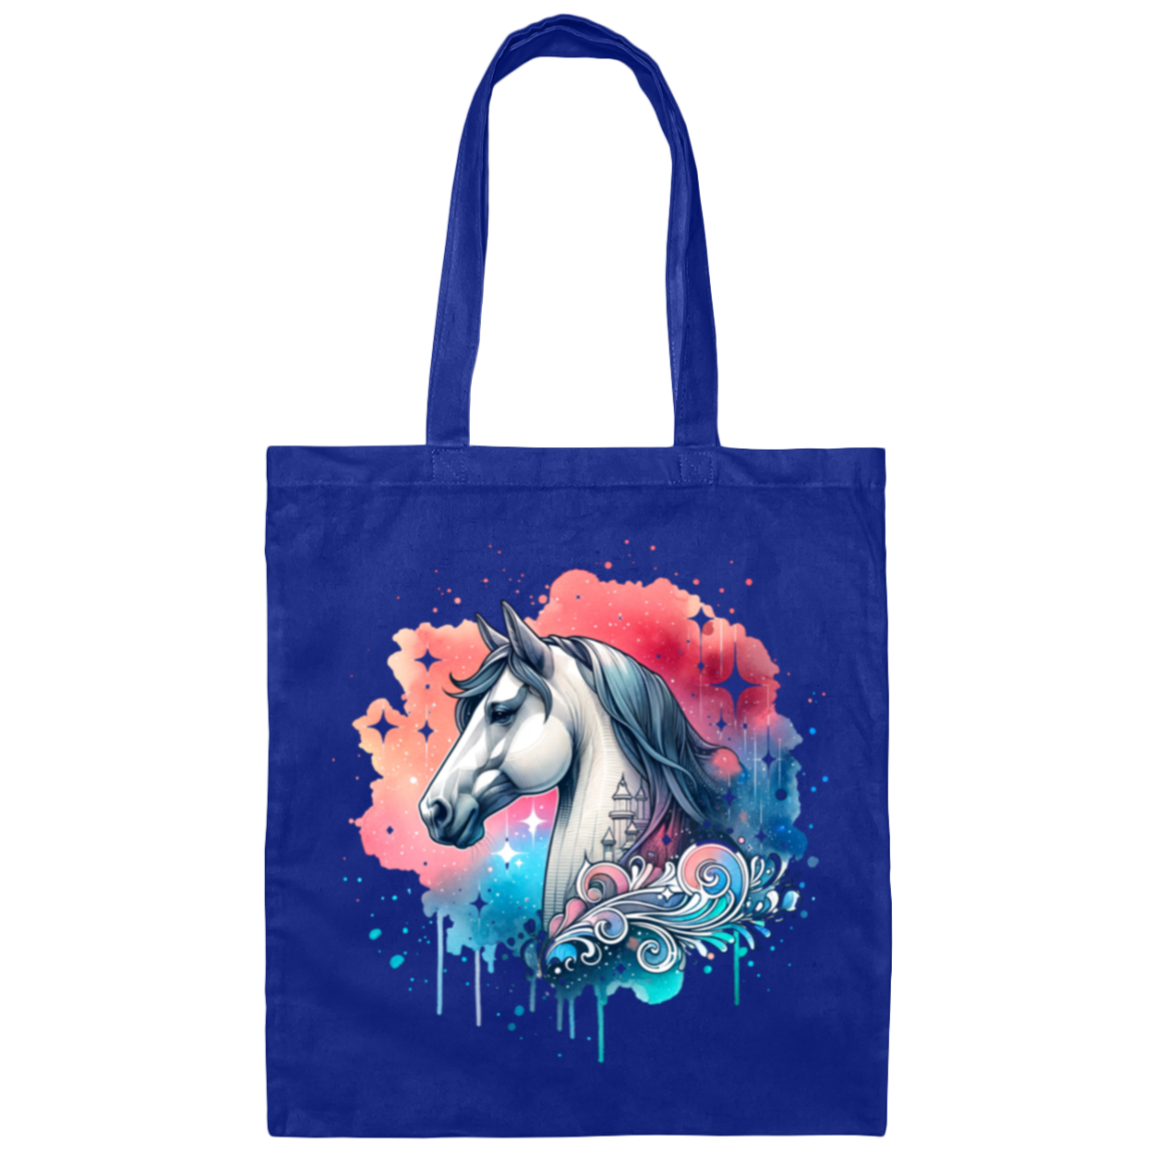 The Prince's Steed Canvas Tote Bag